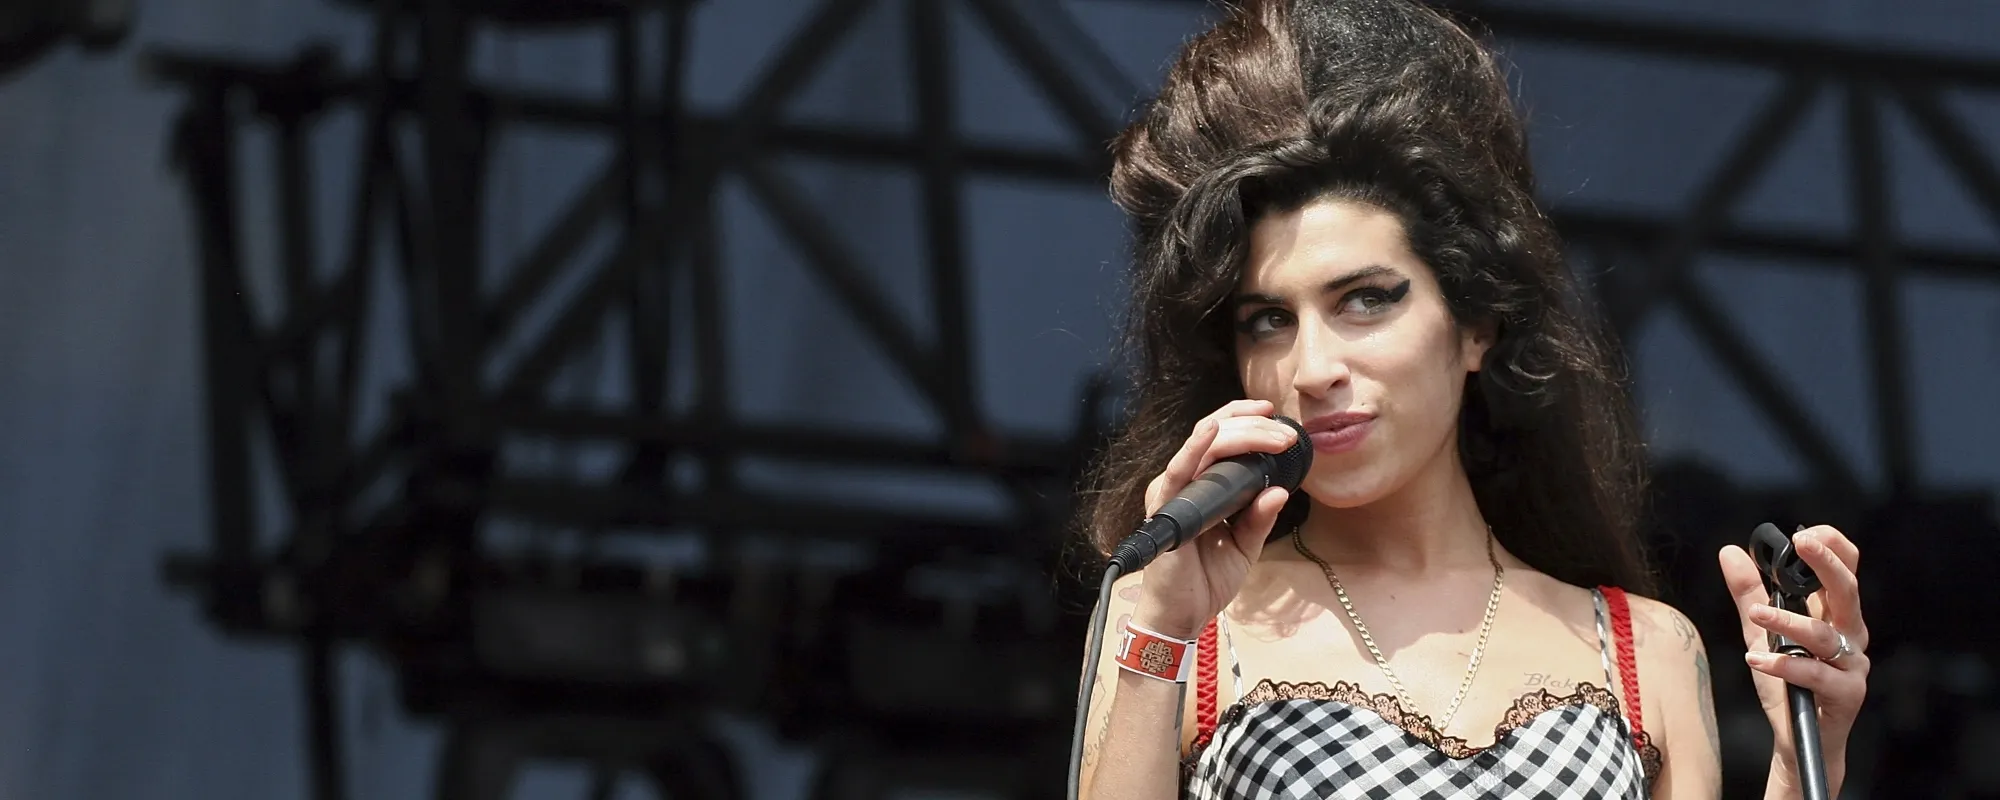 Amy Winehouse Lyric Video from ‘Frank’-era Recording Updated with Unreleased Footage